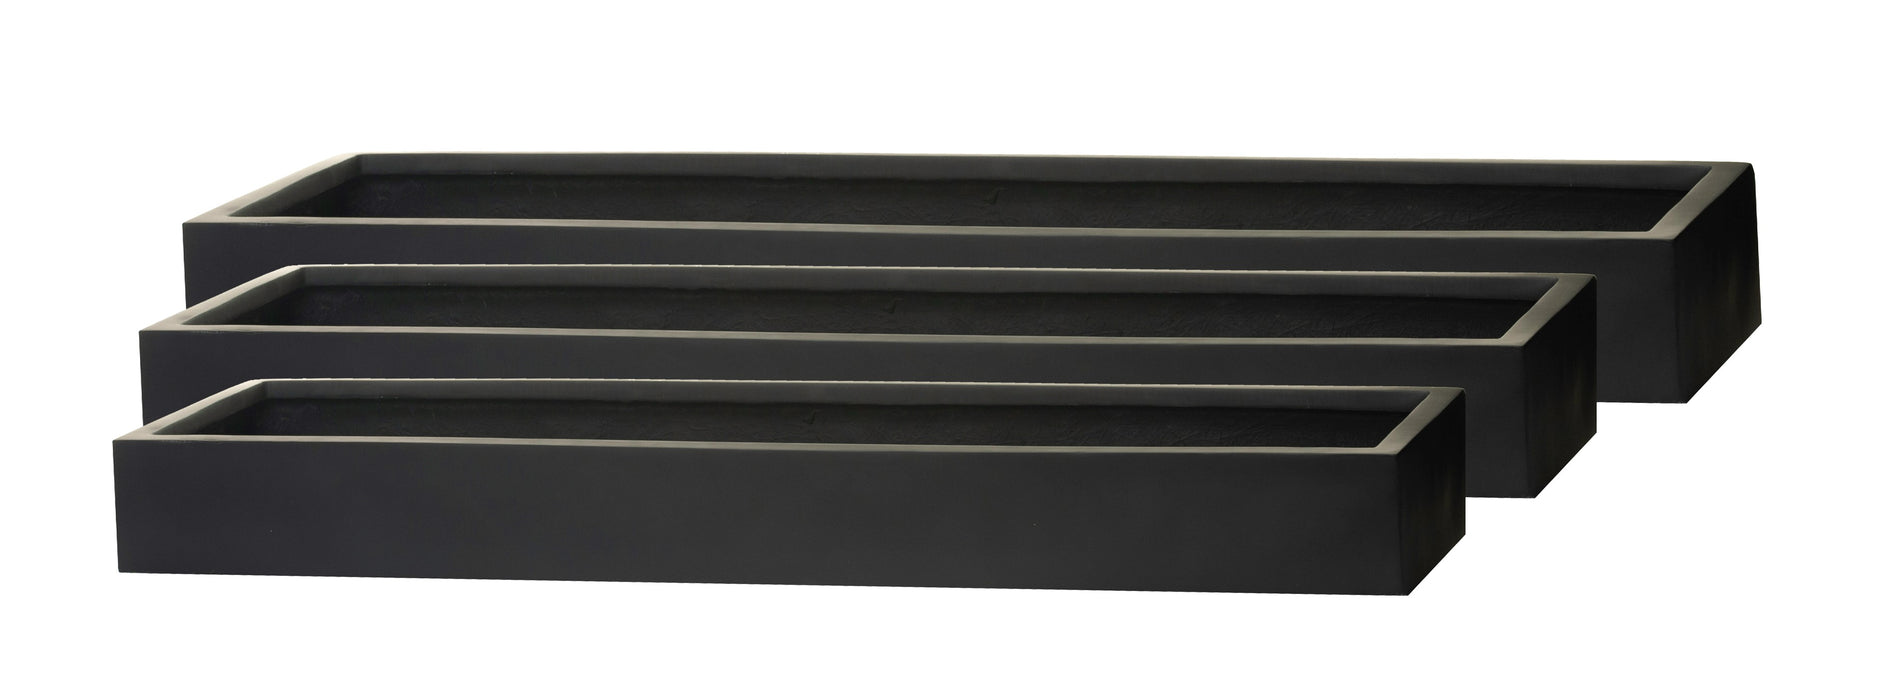 Manhattan Collection Table Top Trays - Matte Black CN1031